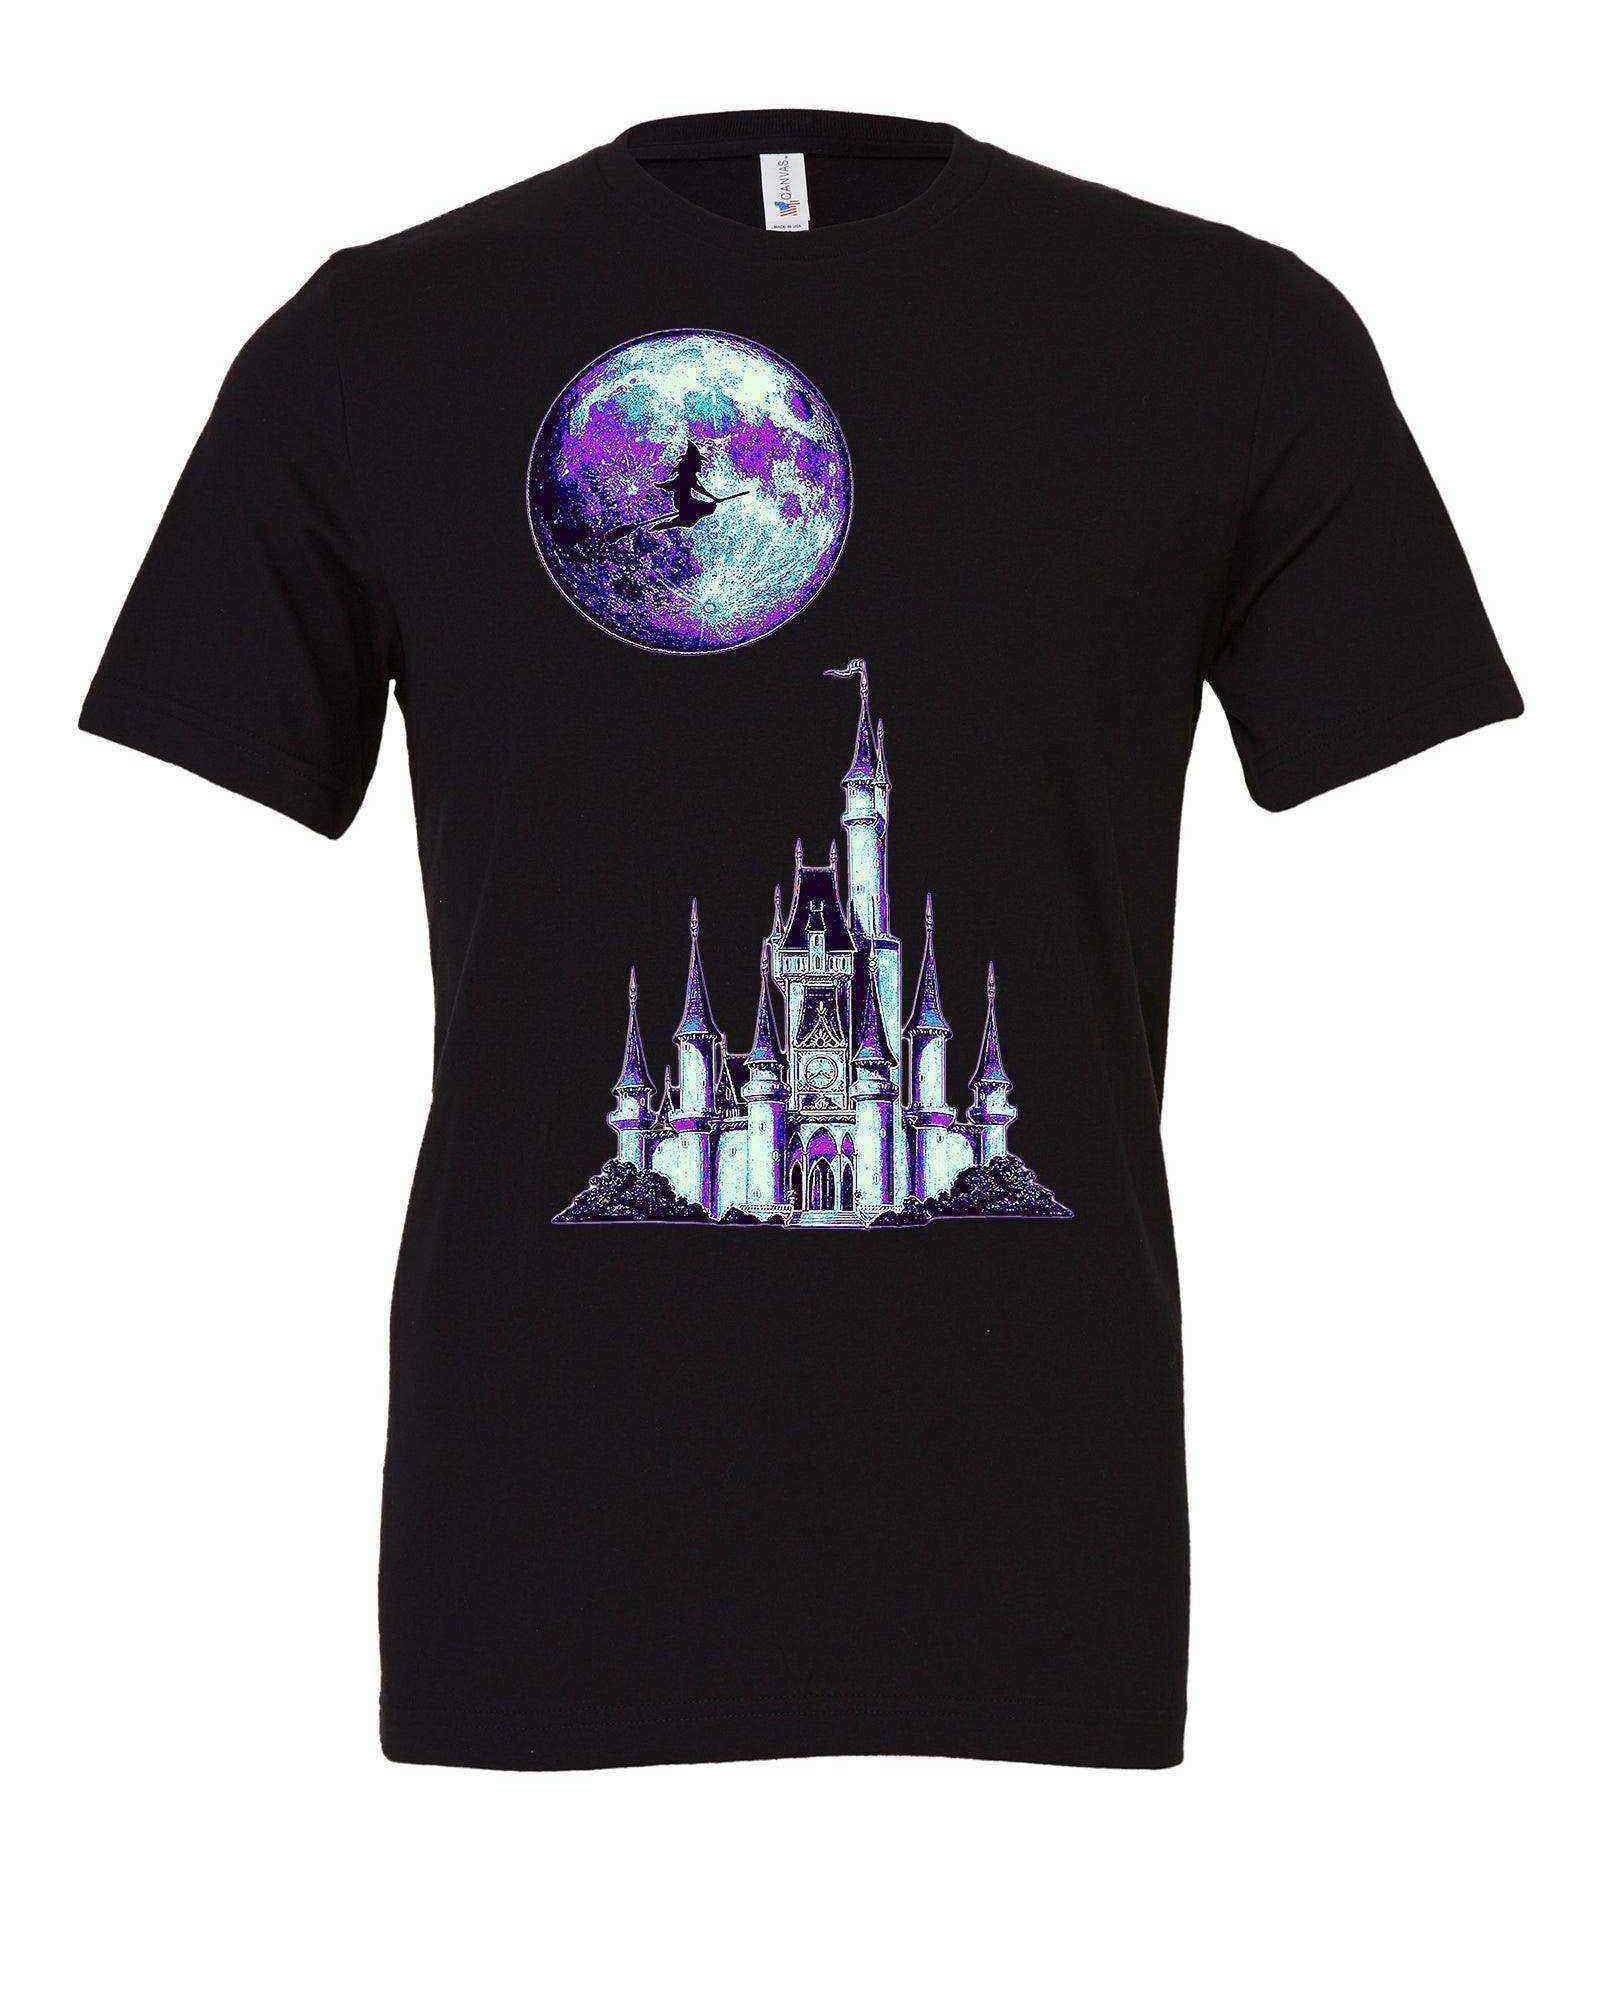 Youth | Not So Scary Halloween Shirt | Boo To You | Haunted Castle - Dylan's Tees